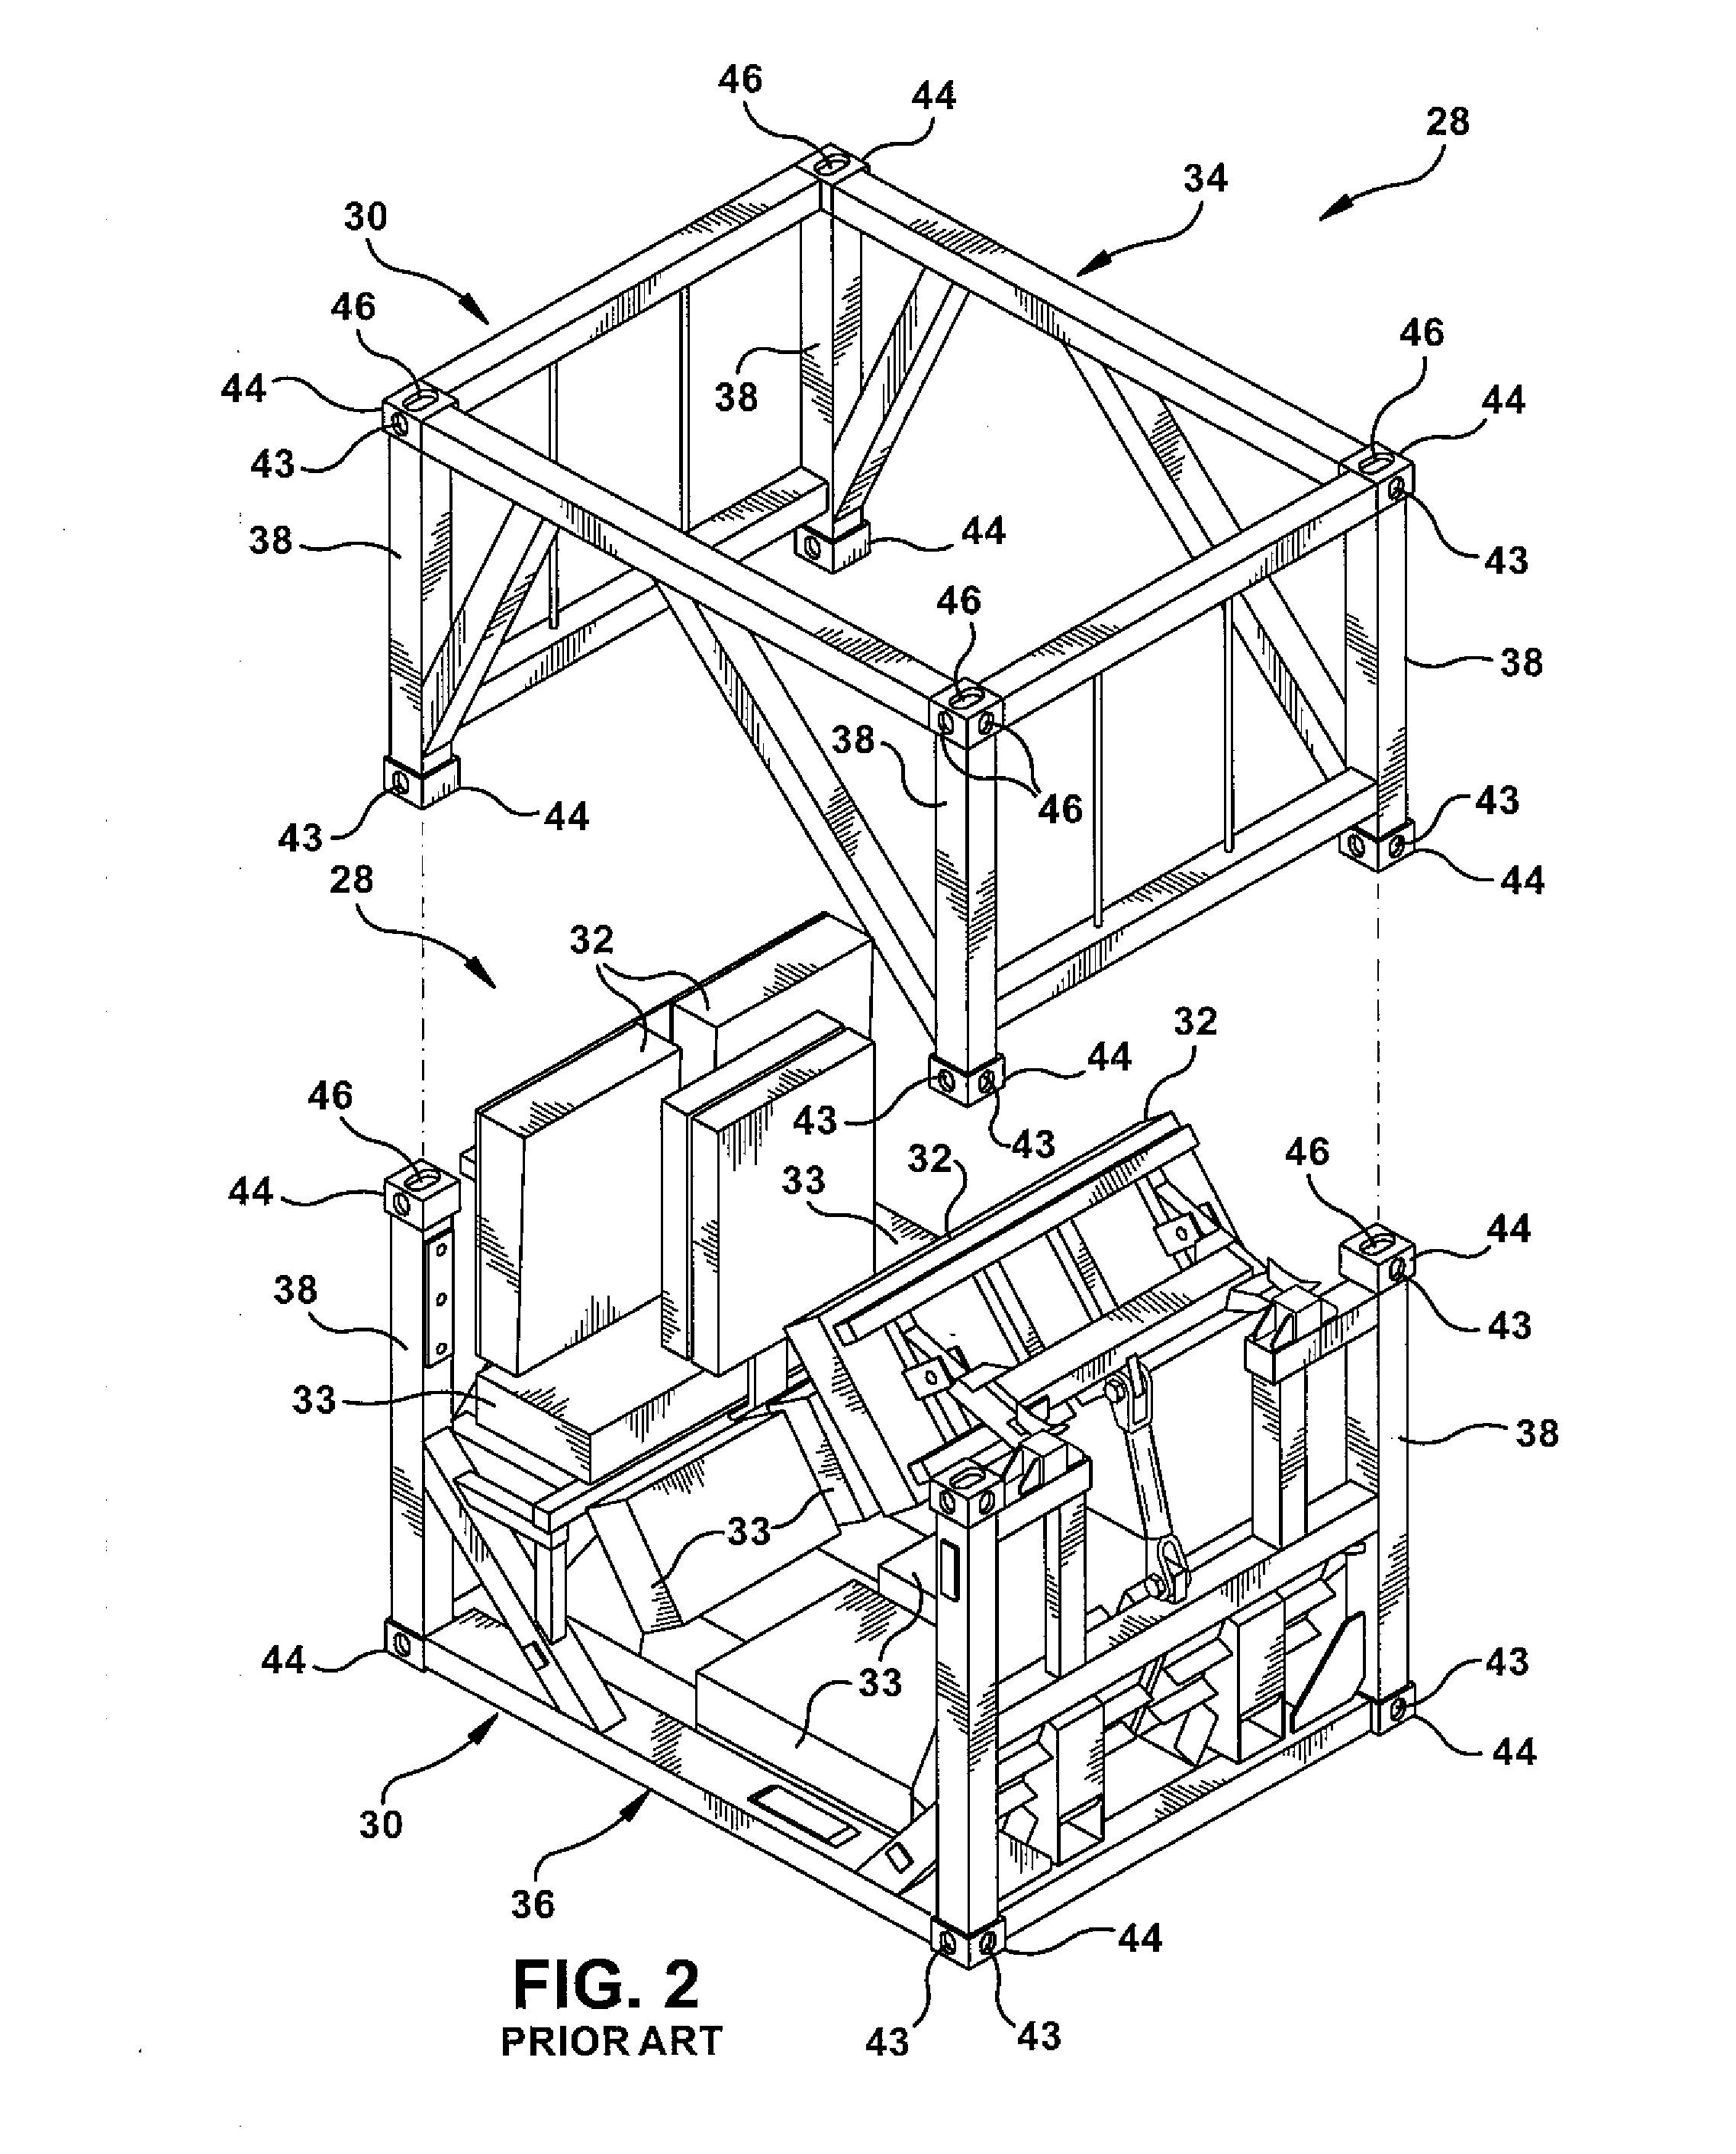 Structure and method for self-aligning rotor blade joints